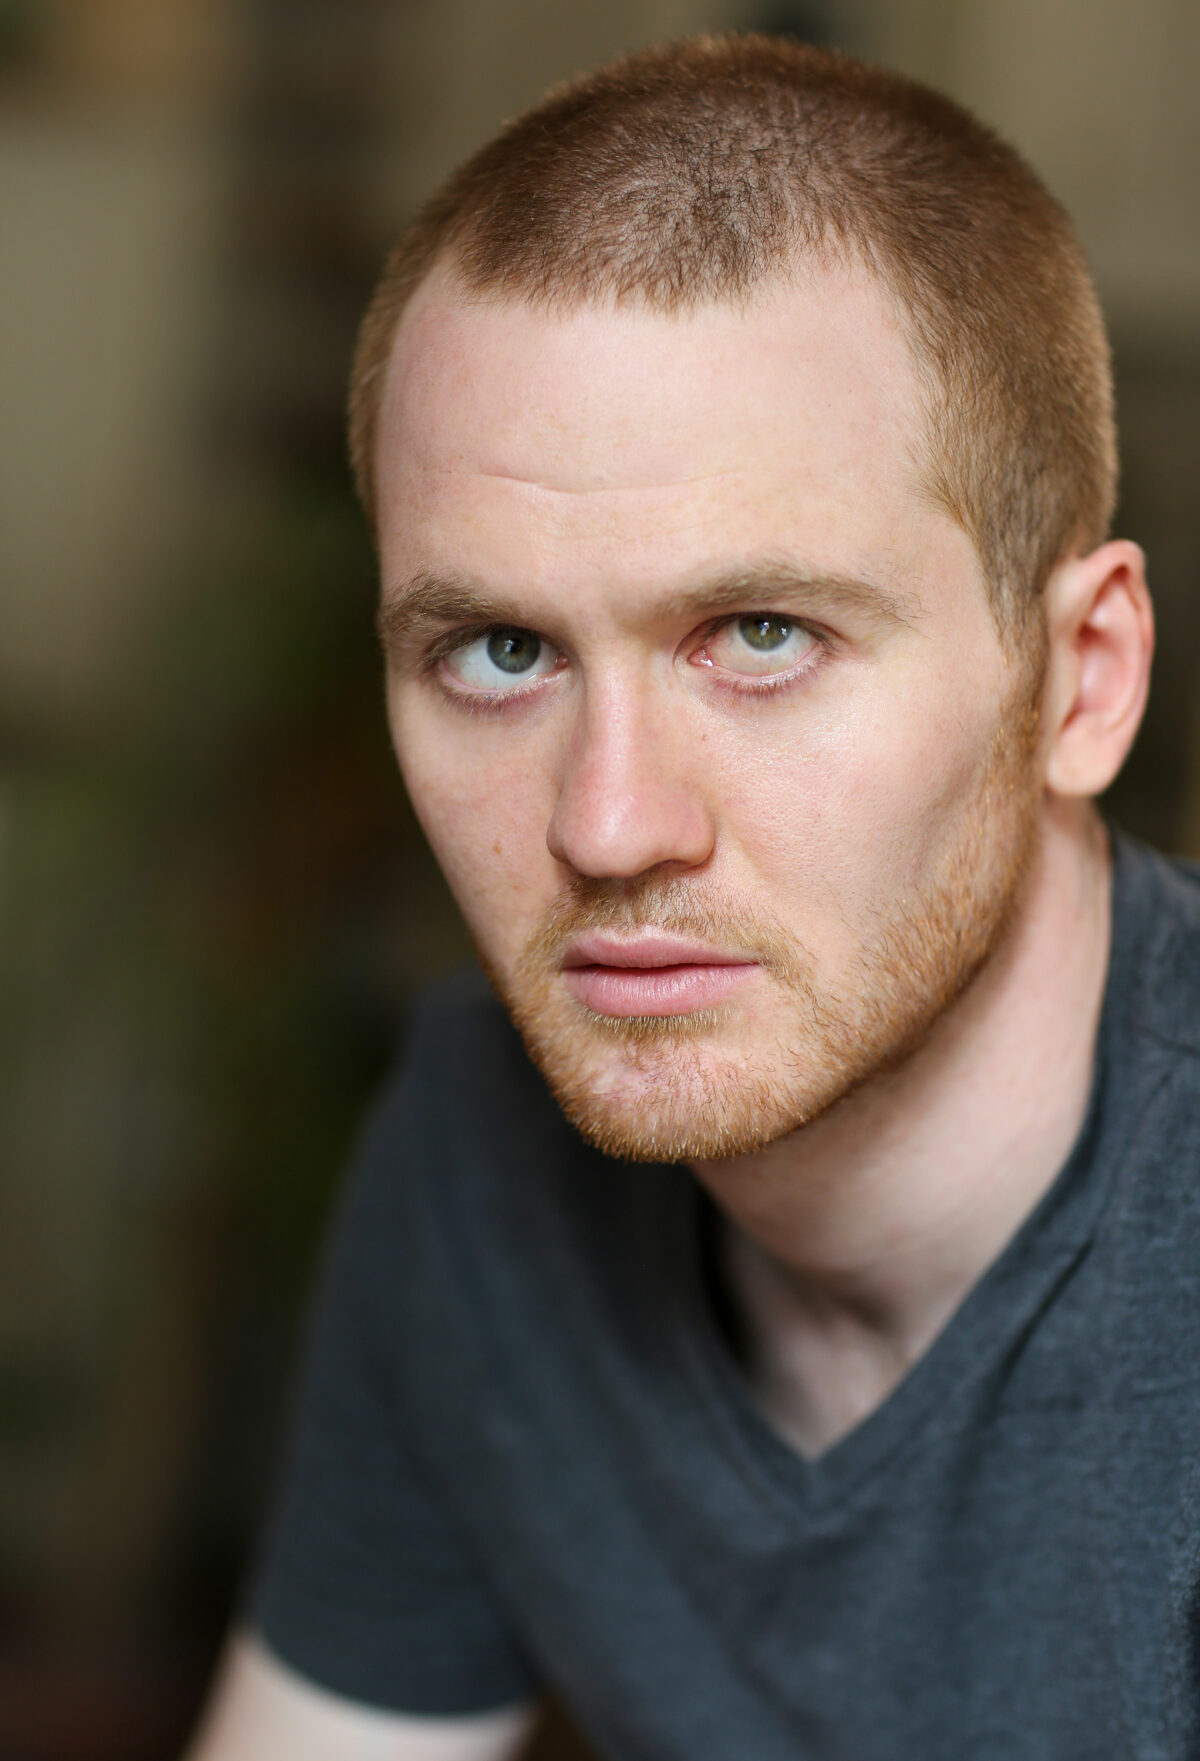 Image description: A headshot of Sam Brewer, a white man with blue eyes, short blonde hair and beard. Sam looks softly into the camera. He is wearing a blue t-shirt.